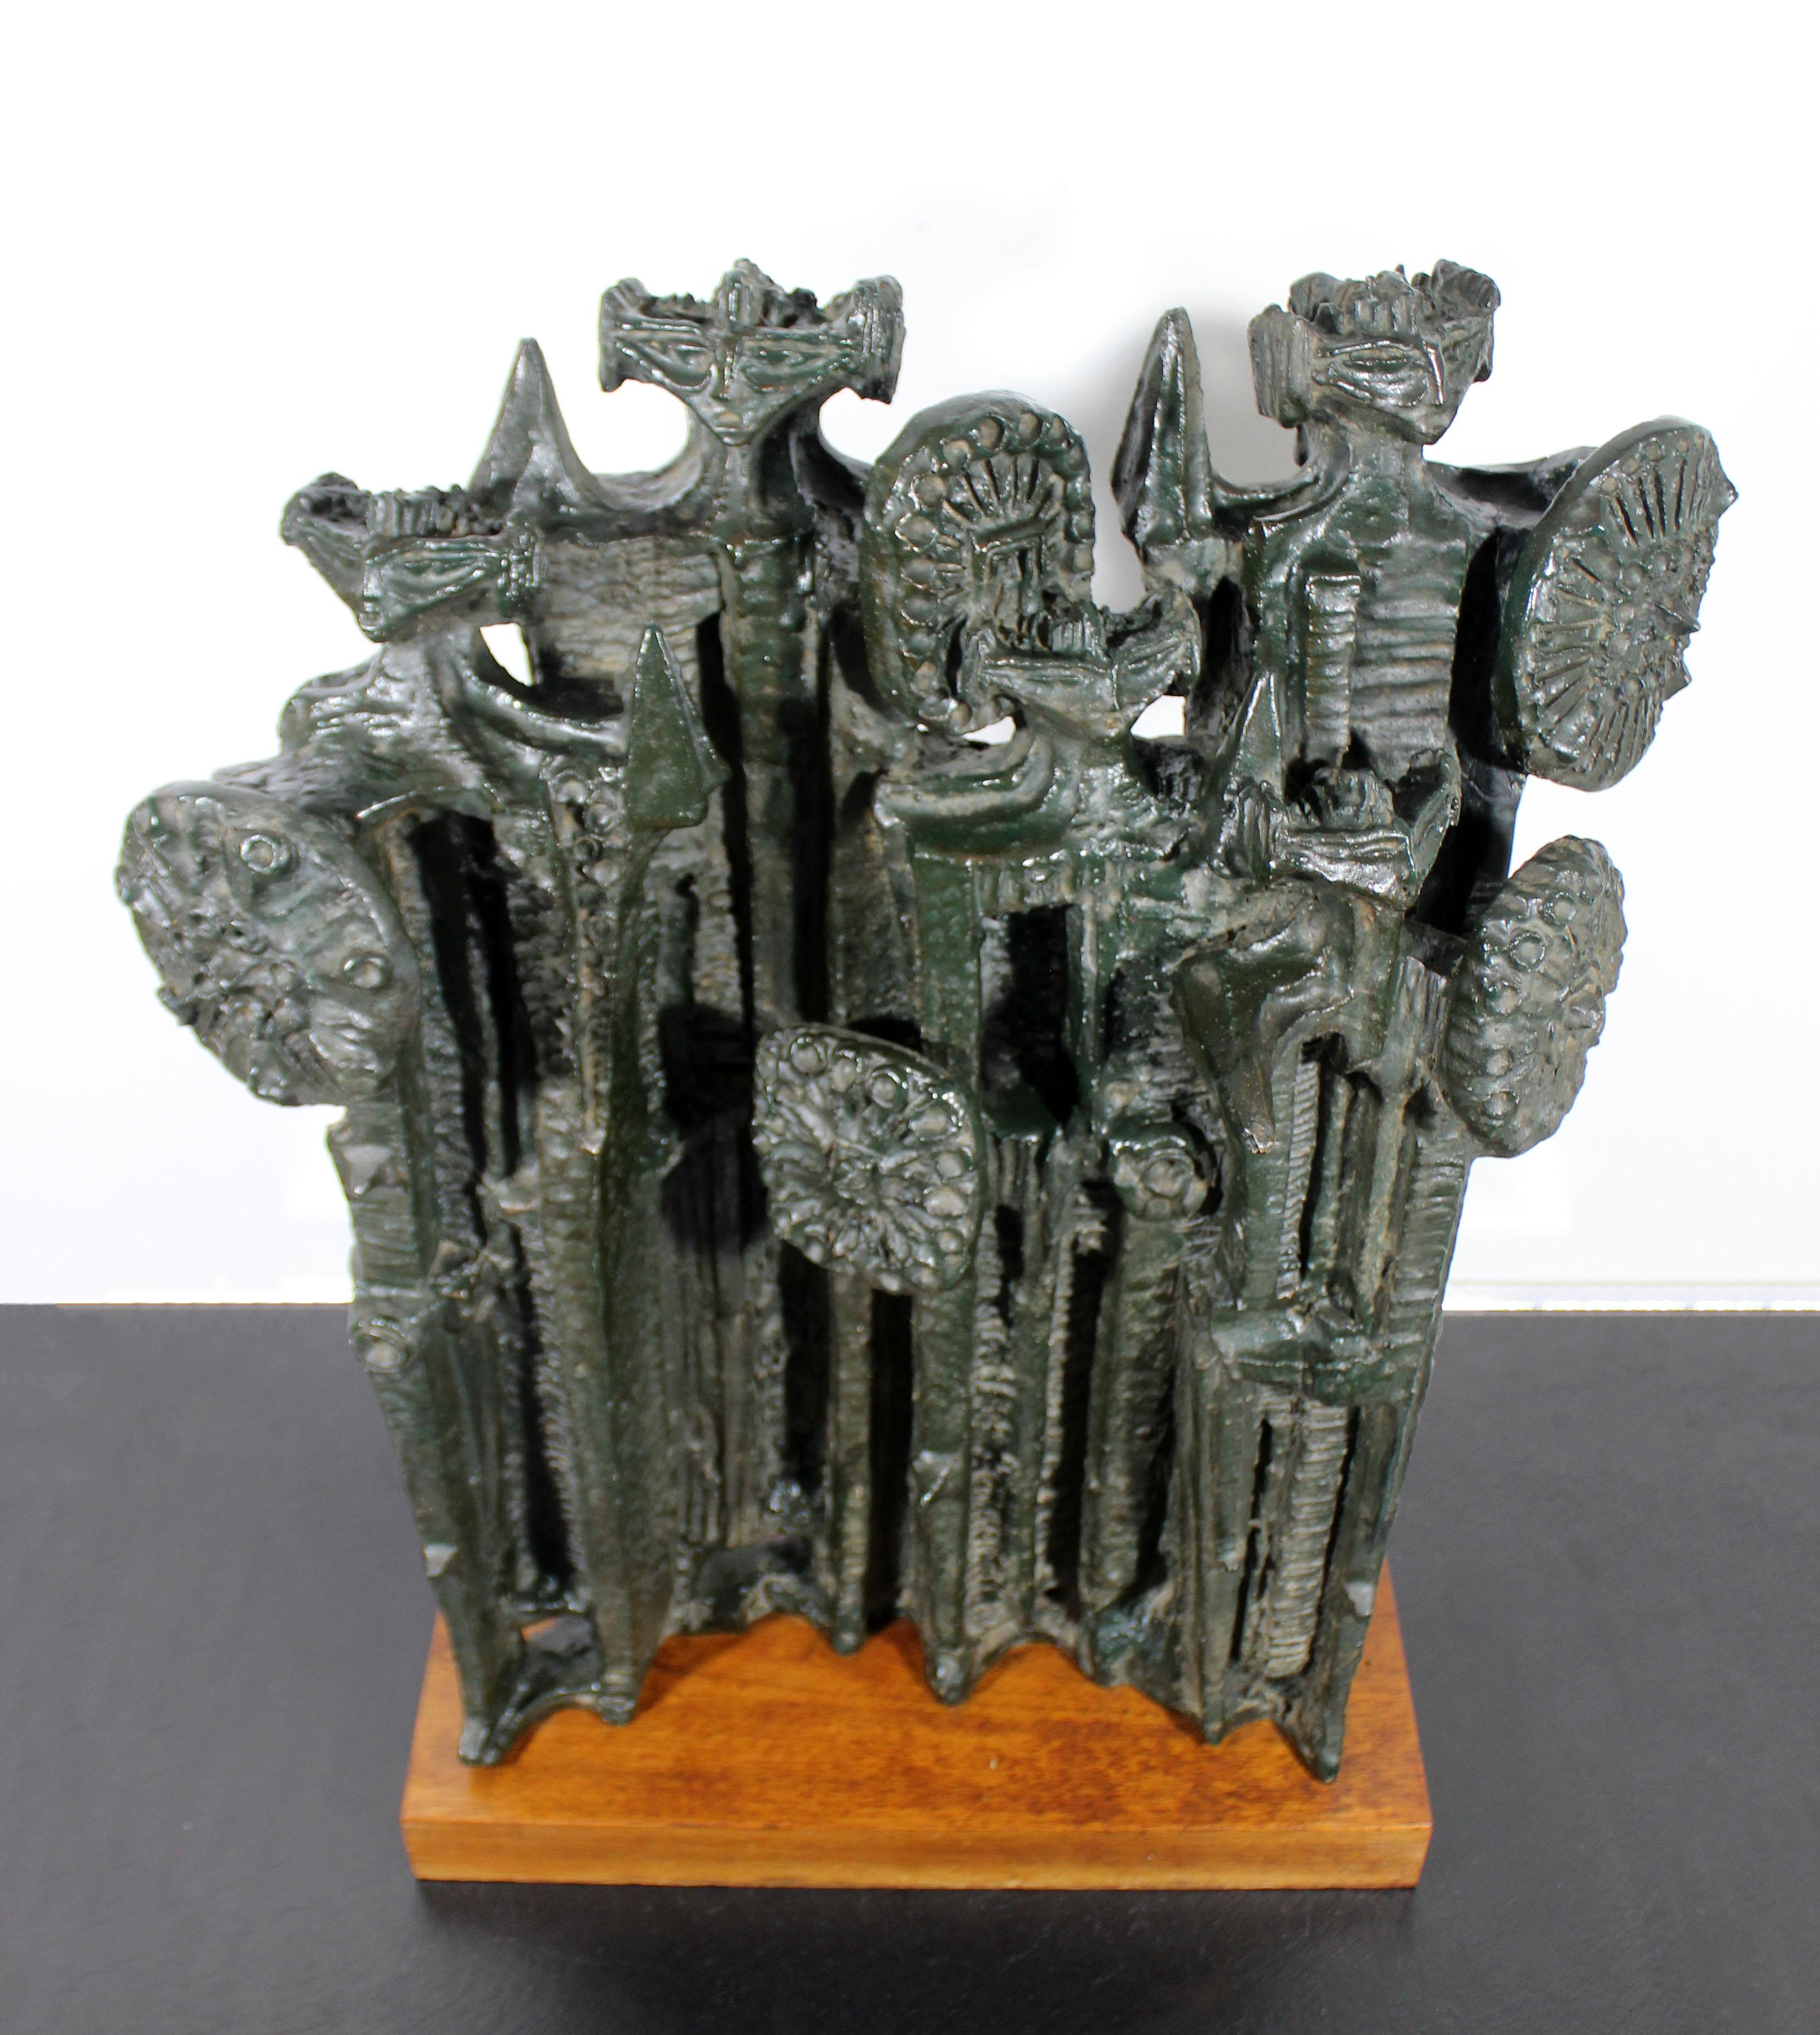 For your consideration is an incredible, Brutalist table sculpture, of abstracted figures, on a wood base, by Austin Productions, circa 1961. In excellent vintage condition. The dimensions are 20